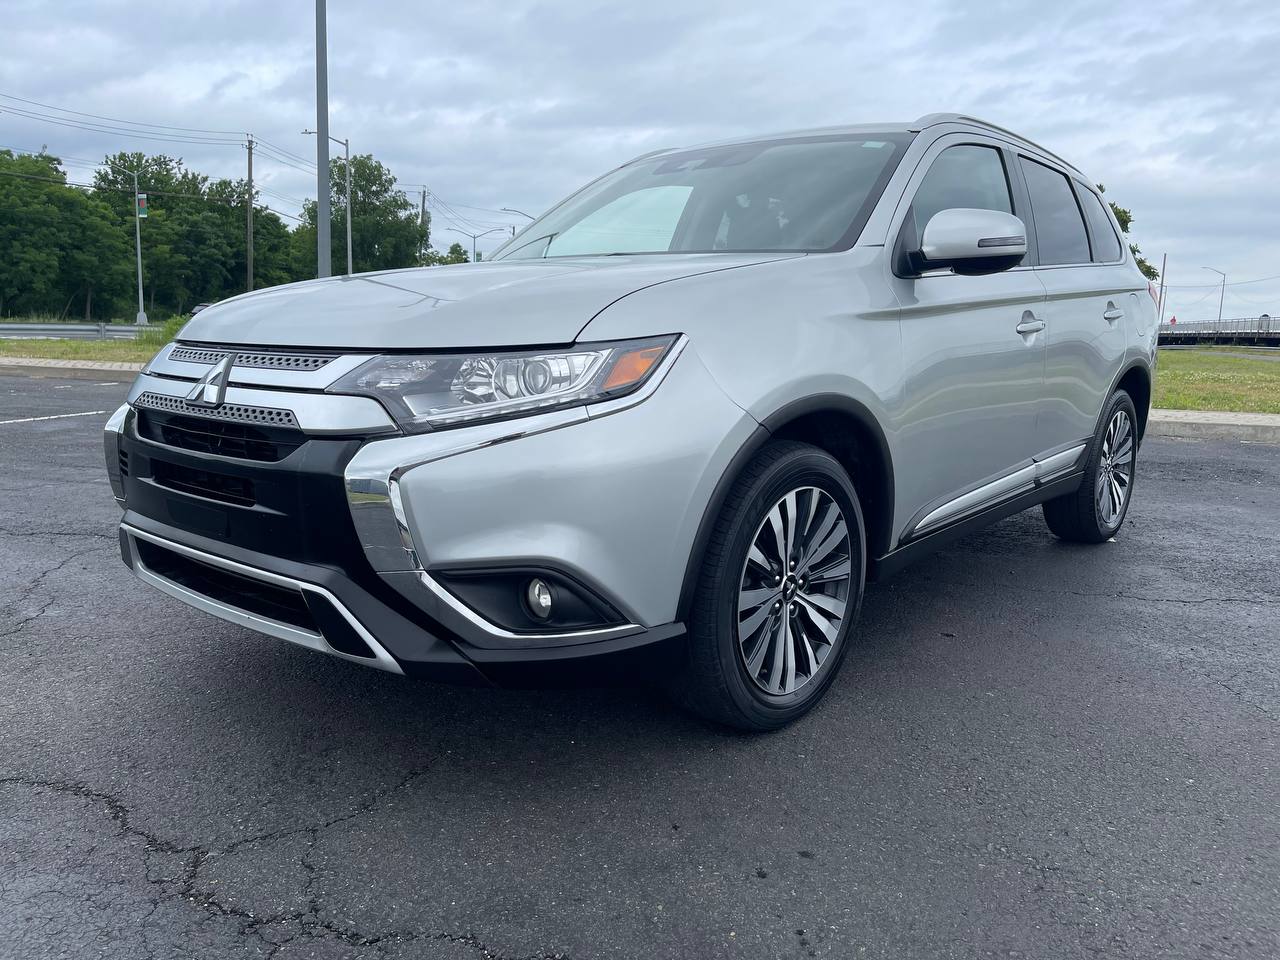 Used Car - 2020 Mitsubishi Outlander SEL for Sale in Staten Island, NY